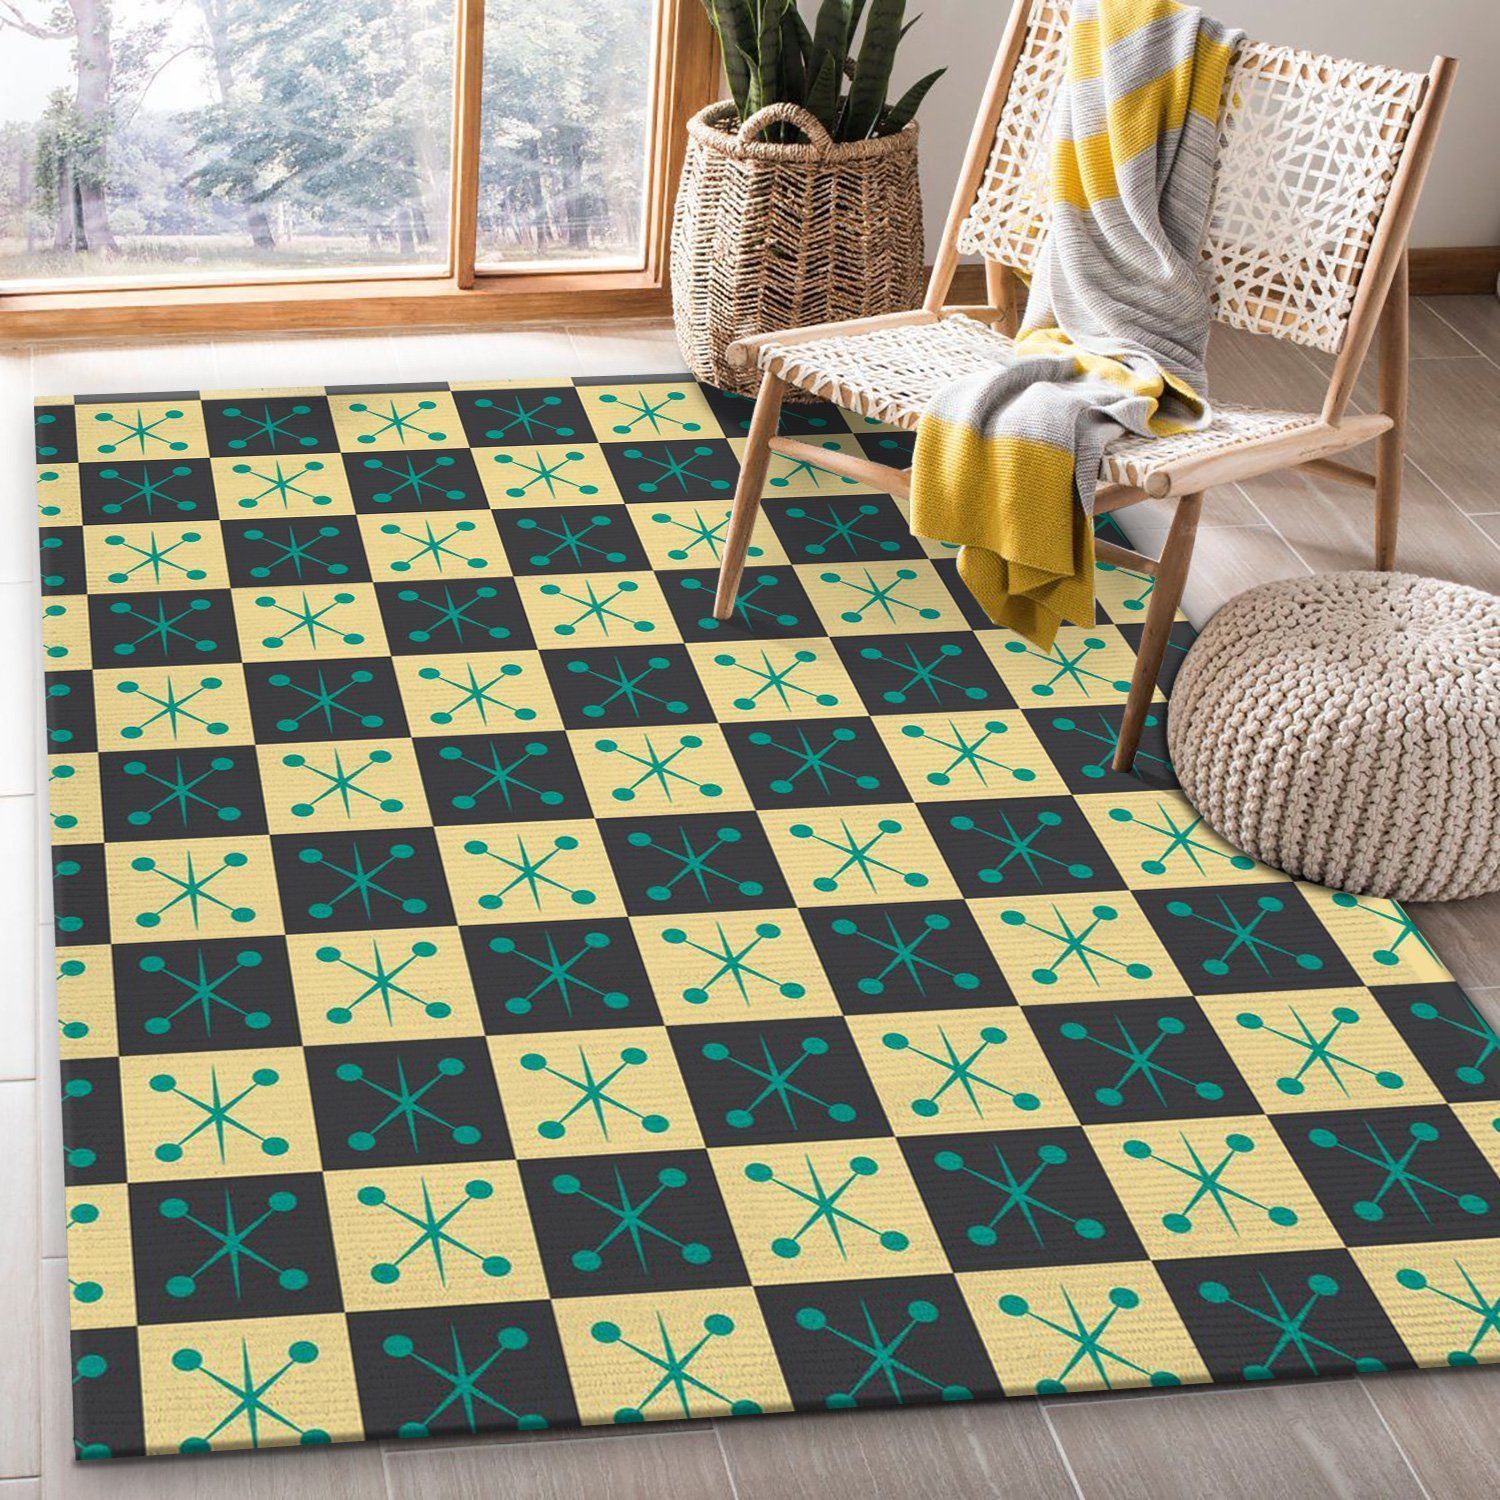 Midcentury Pattern 55 Area Rug Carpet, Living room and bedroom Rug, Family Gift US Decor - Indoor Outdoor Rugs